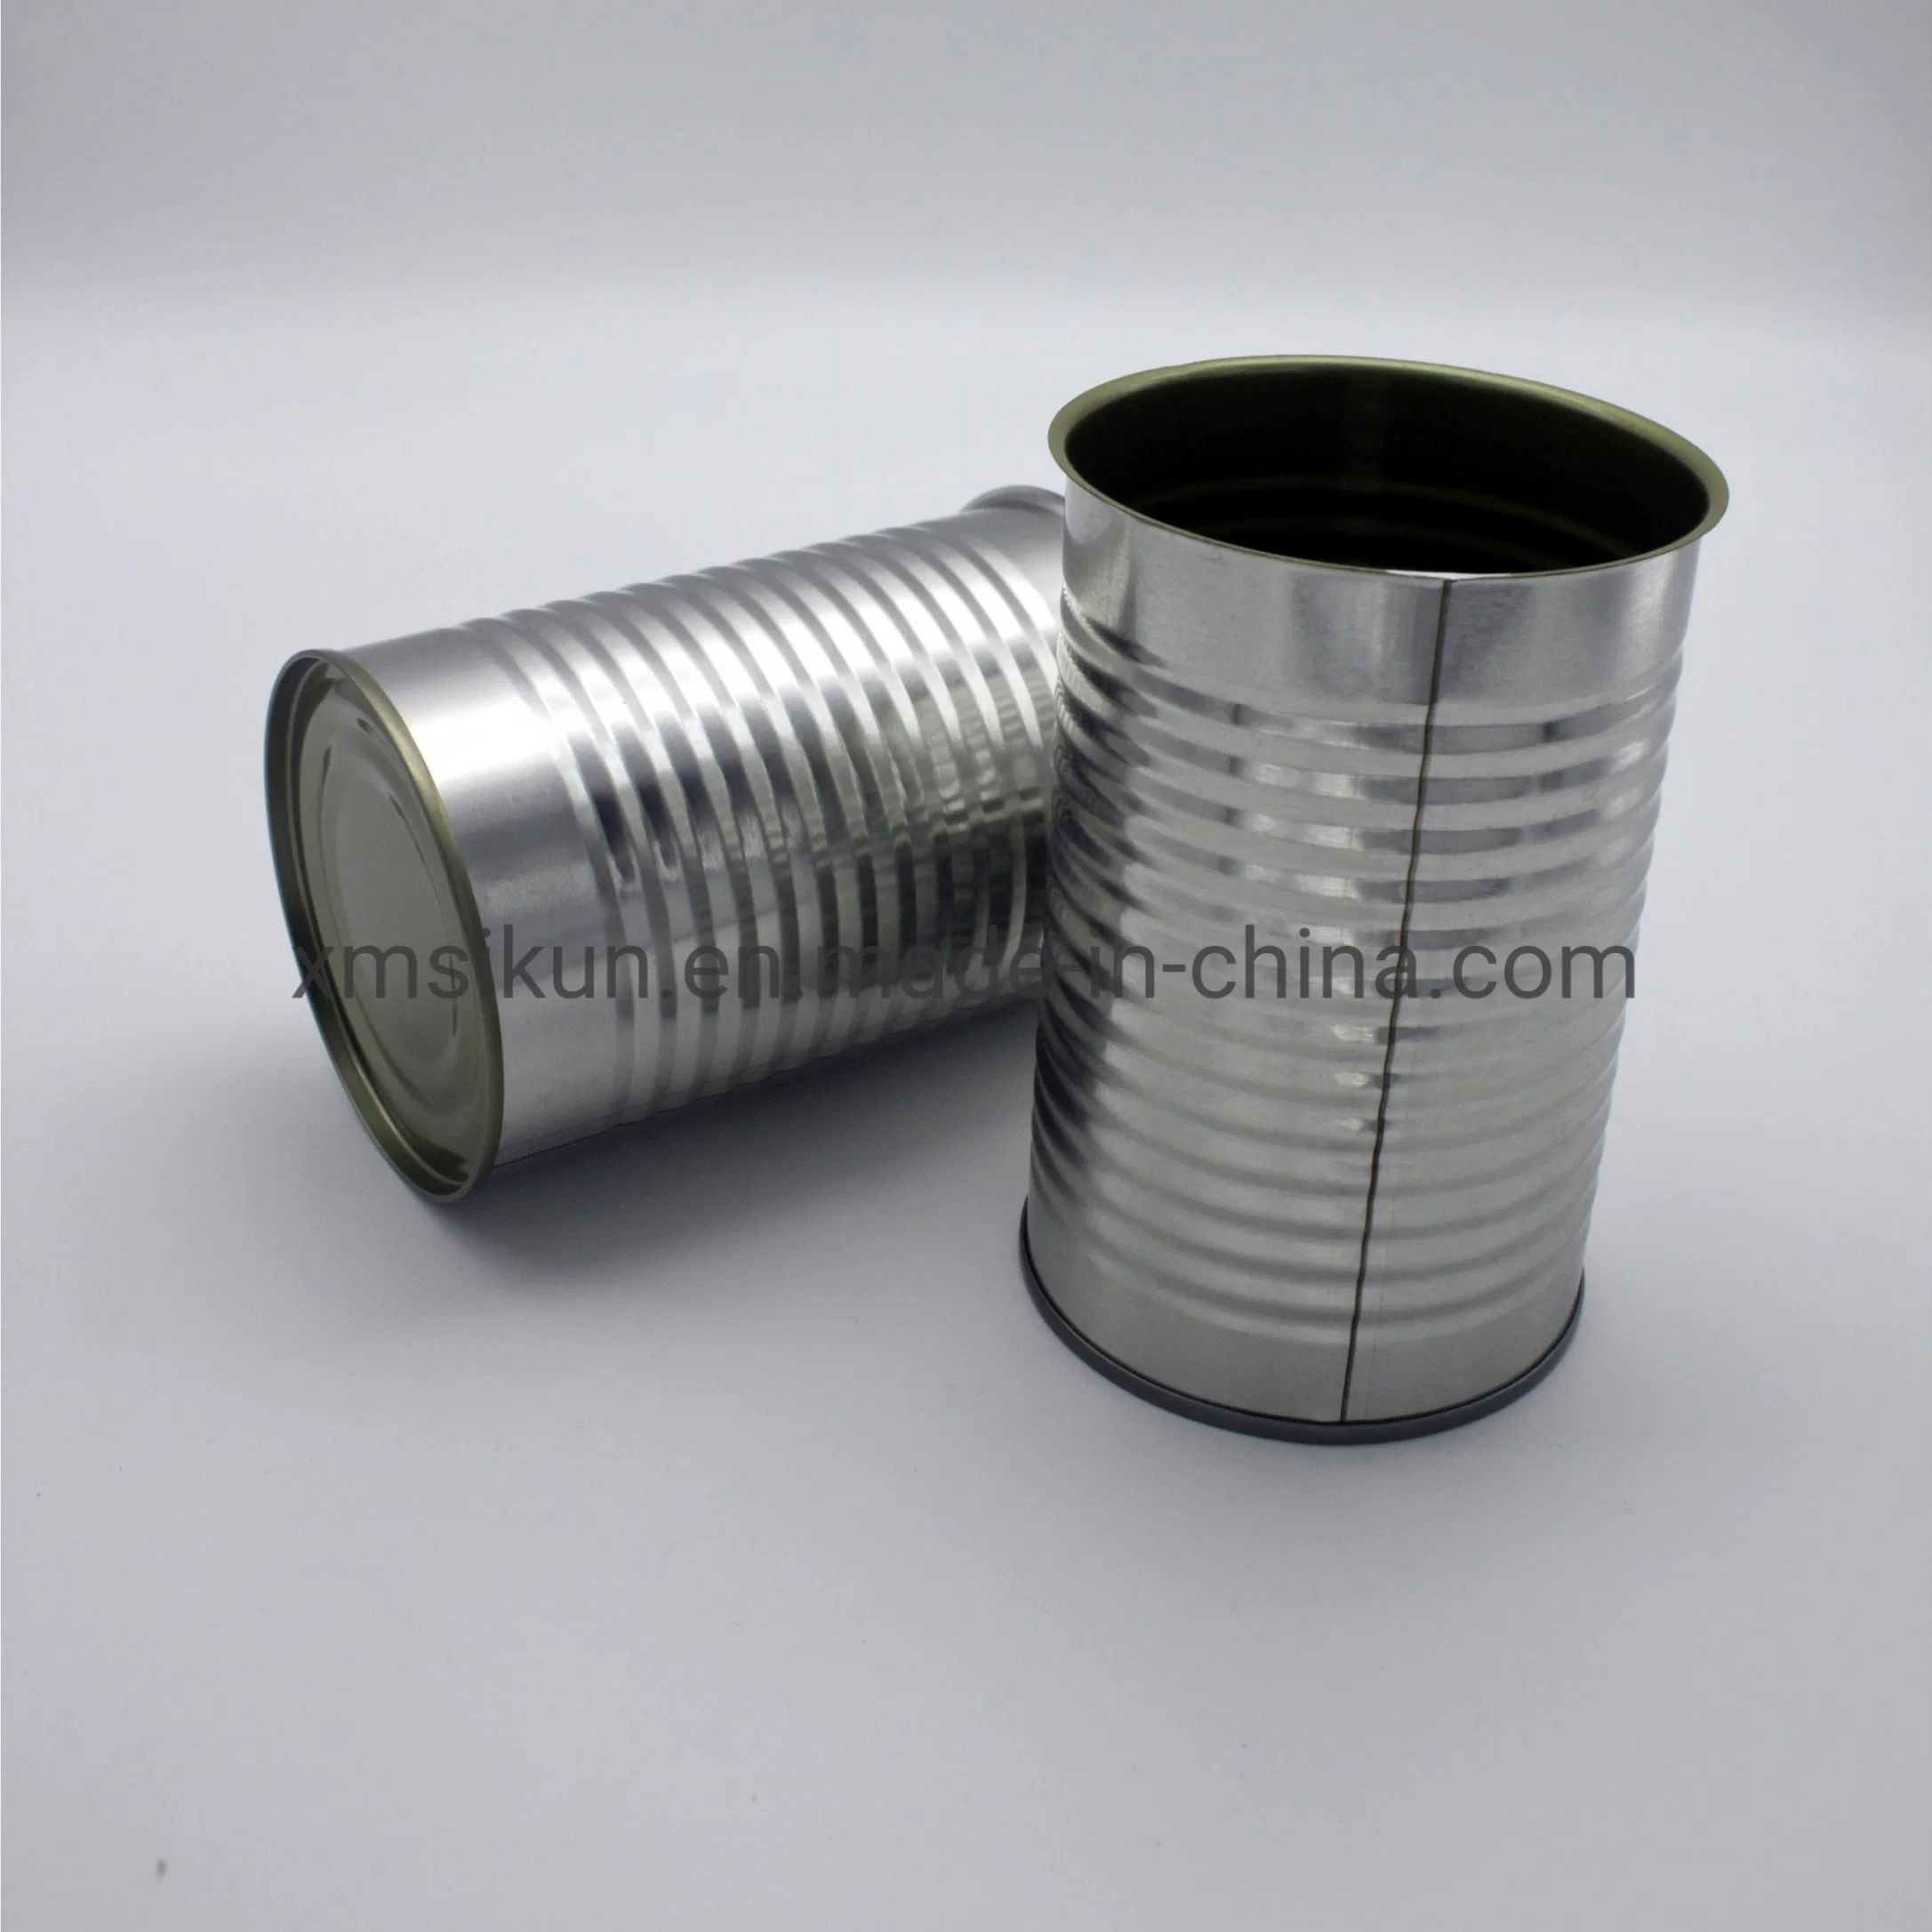 Wholesale/Supplier Hot Selling Easy Open Lid Round Tin Can 7113# for Food Grade Packing